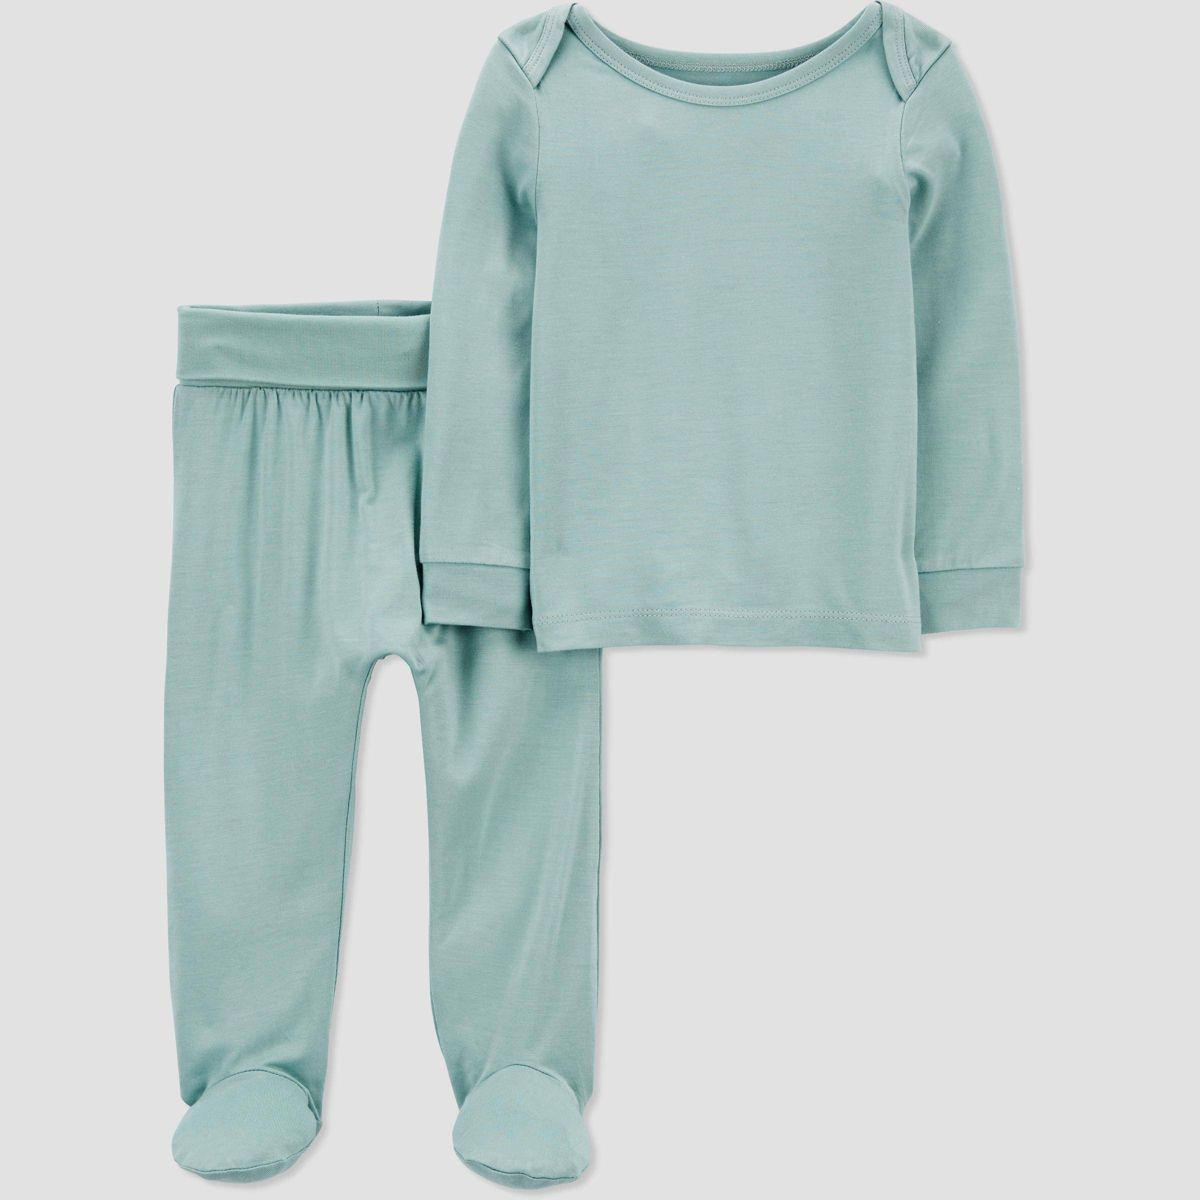 Carter's Just One You®️ Baby 2pc Top & Bottom Set - Light Green | Target